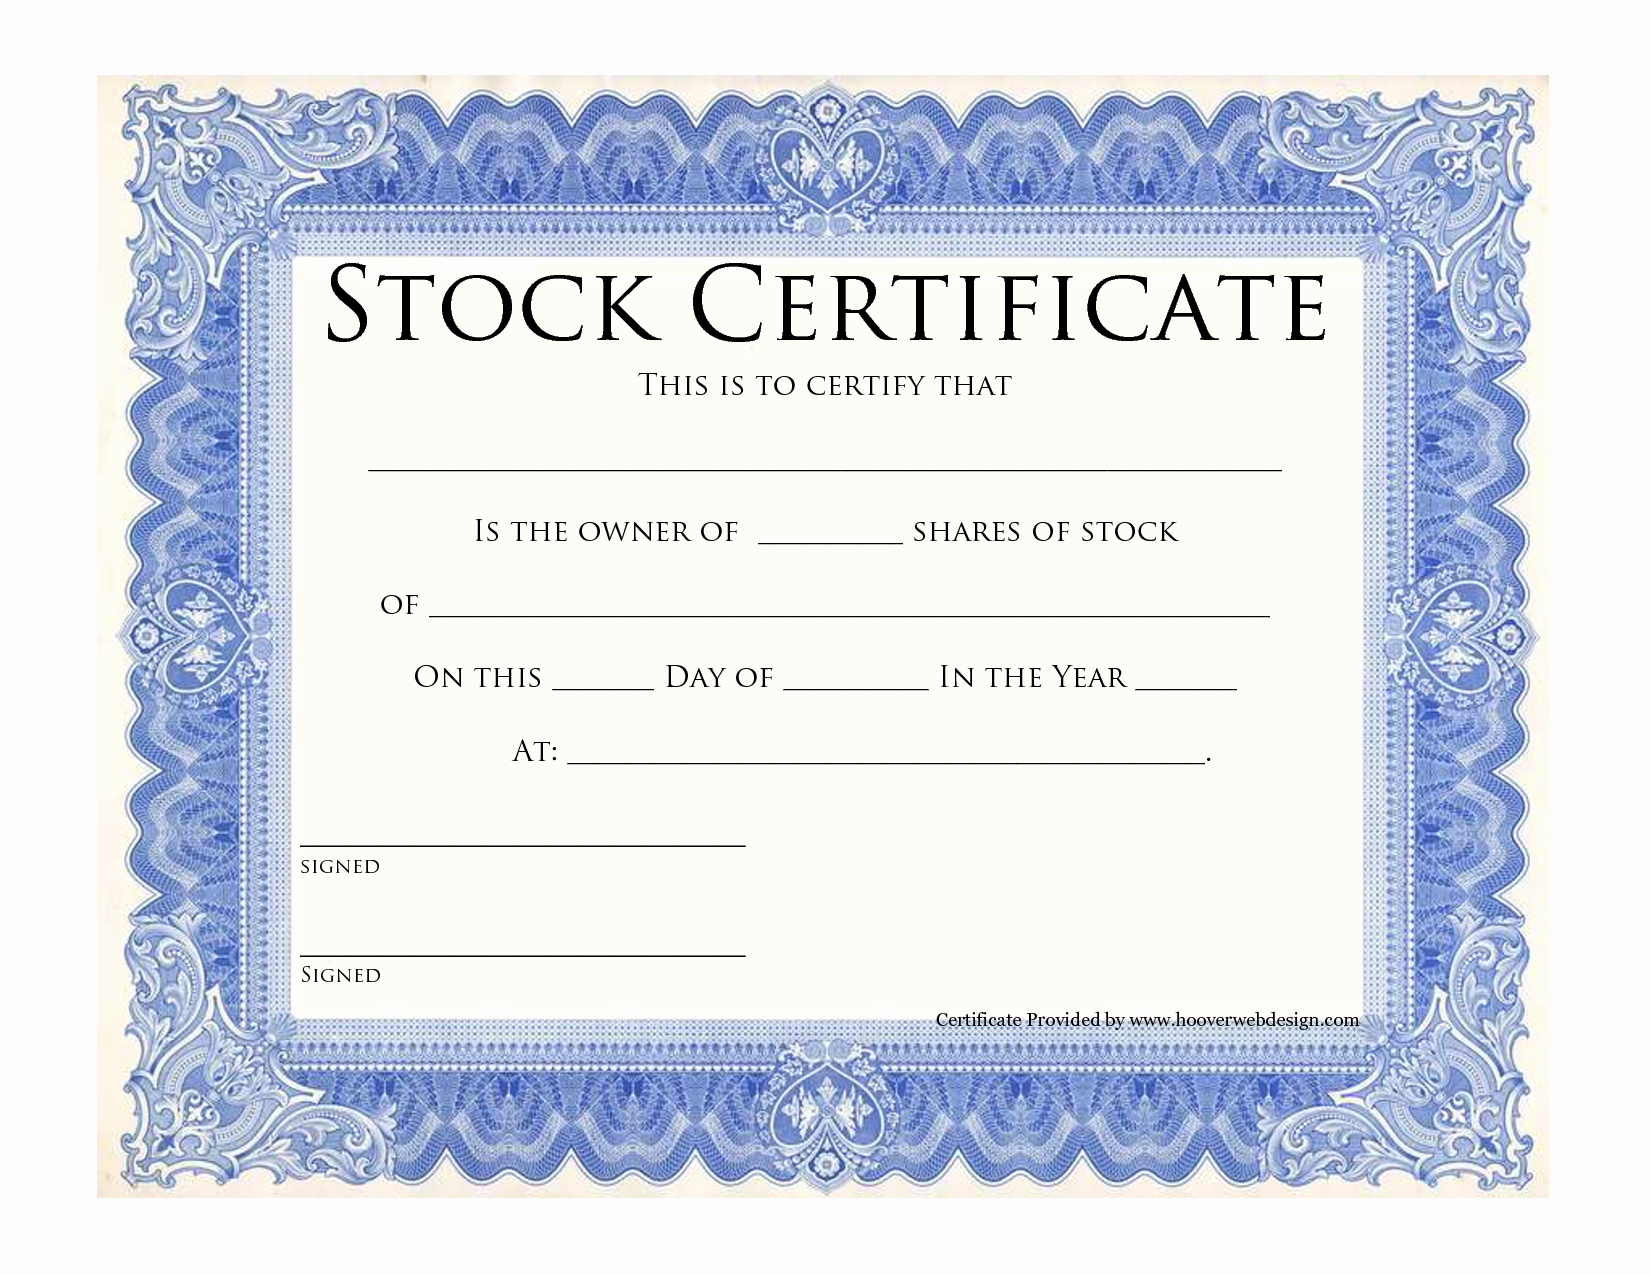 Corporate Stock Certificate Template Awesome why Private Panies Don T Need to issue Stock